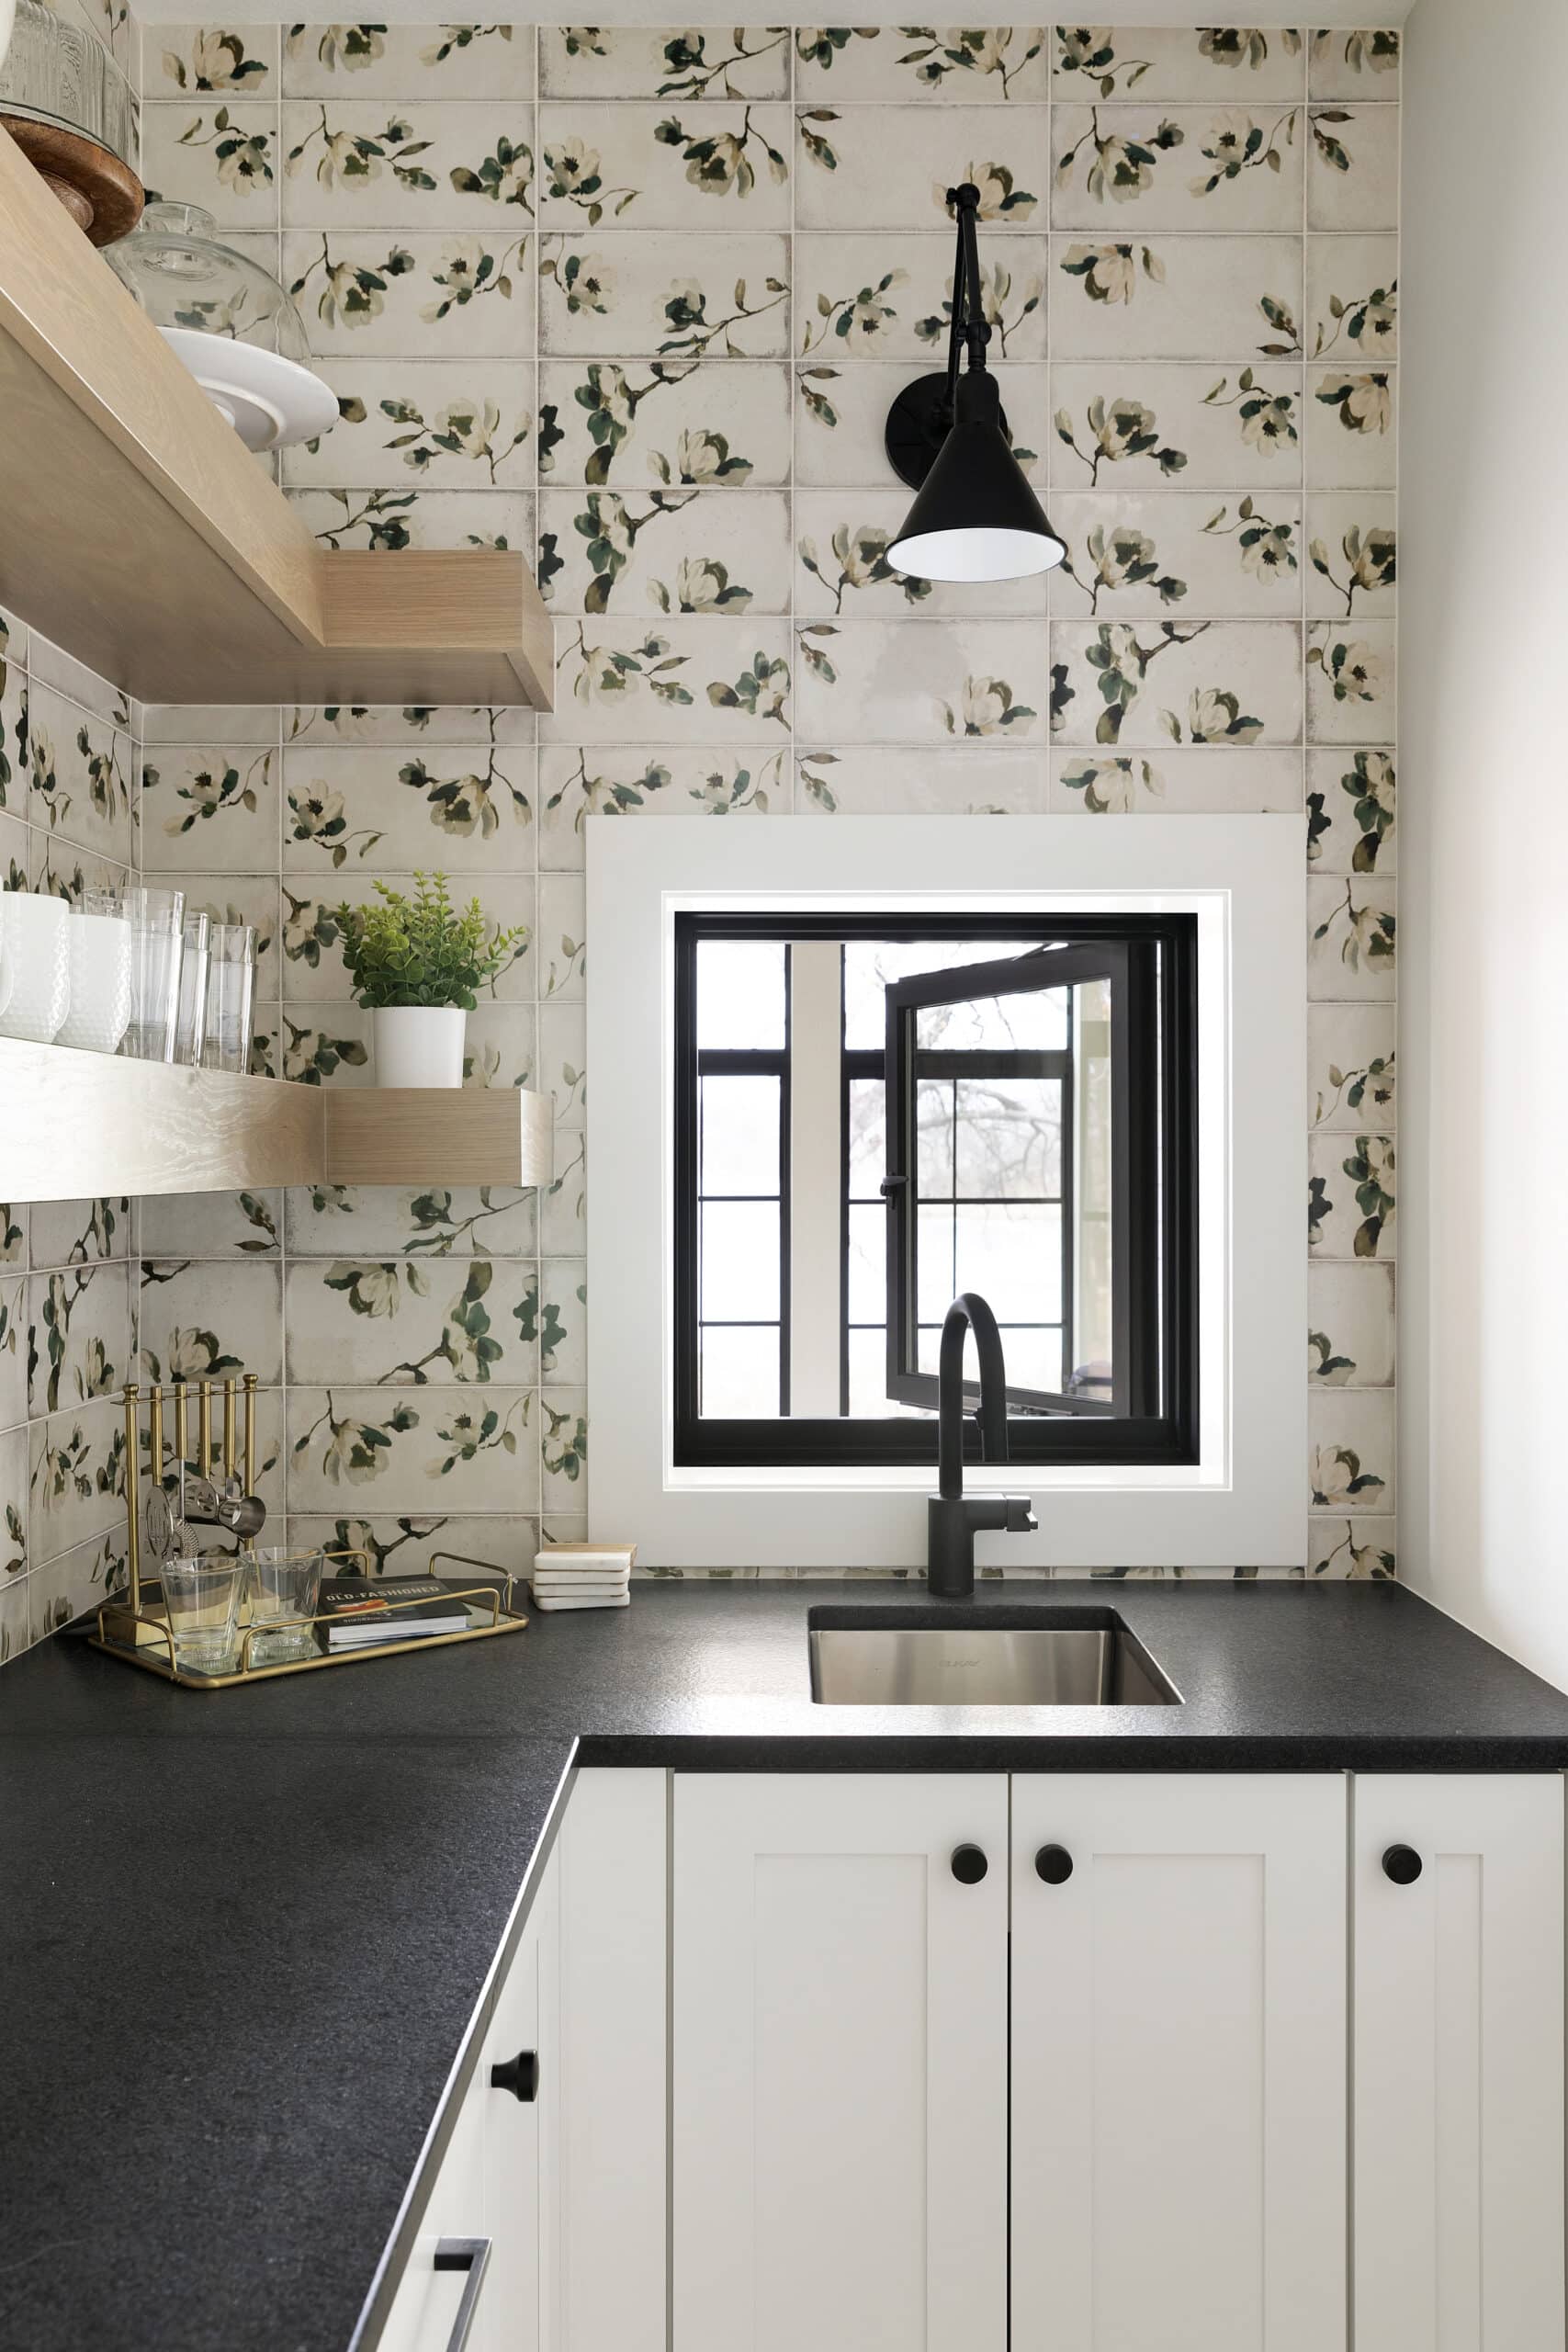 Unique panel and wallpaper designs can add personality to a space.